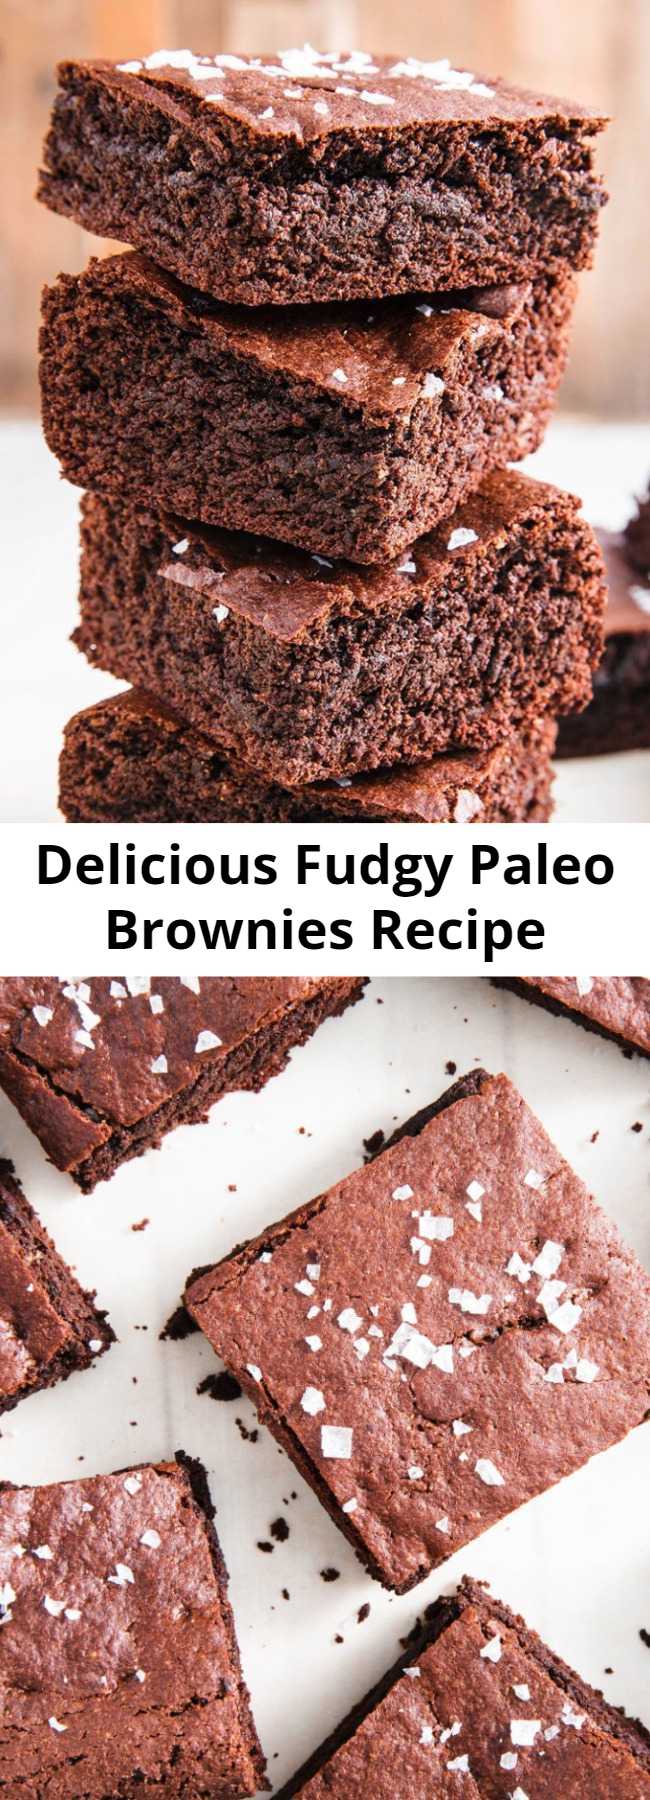 Delicious Fudgy Paleo Brownies Recipe - Yassss, brownies that are totally Paleo! Here's how to make the ultimate paleo-friendly dessert. Made with almond flour, almond butter, and coconut sugar, these Paleo Brownies are delicious. These are more than just an alternative, but a delicious brownie that also happens to be Paleo approved! 